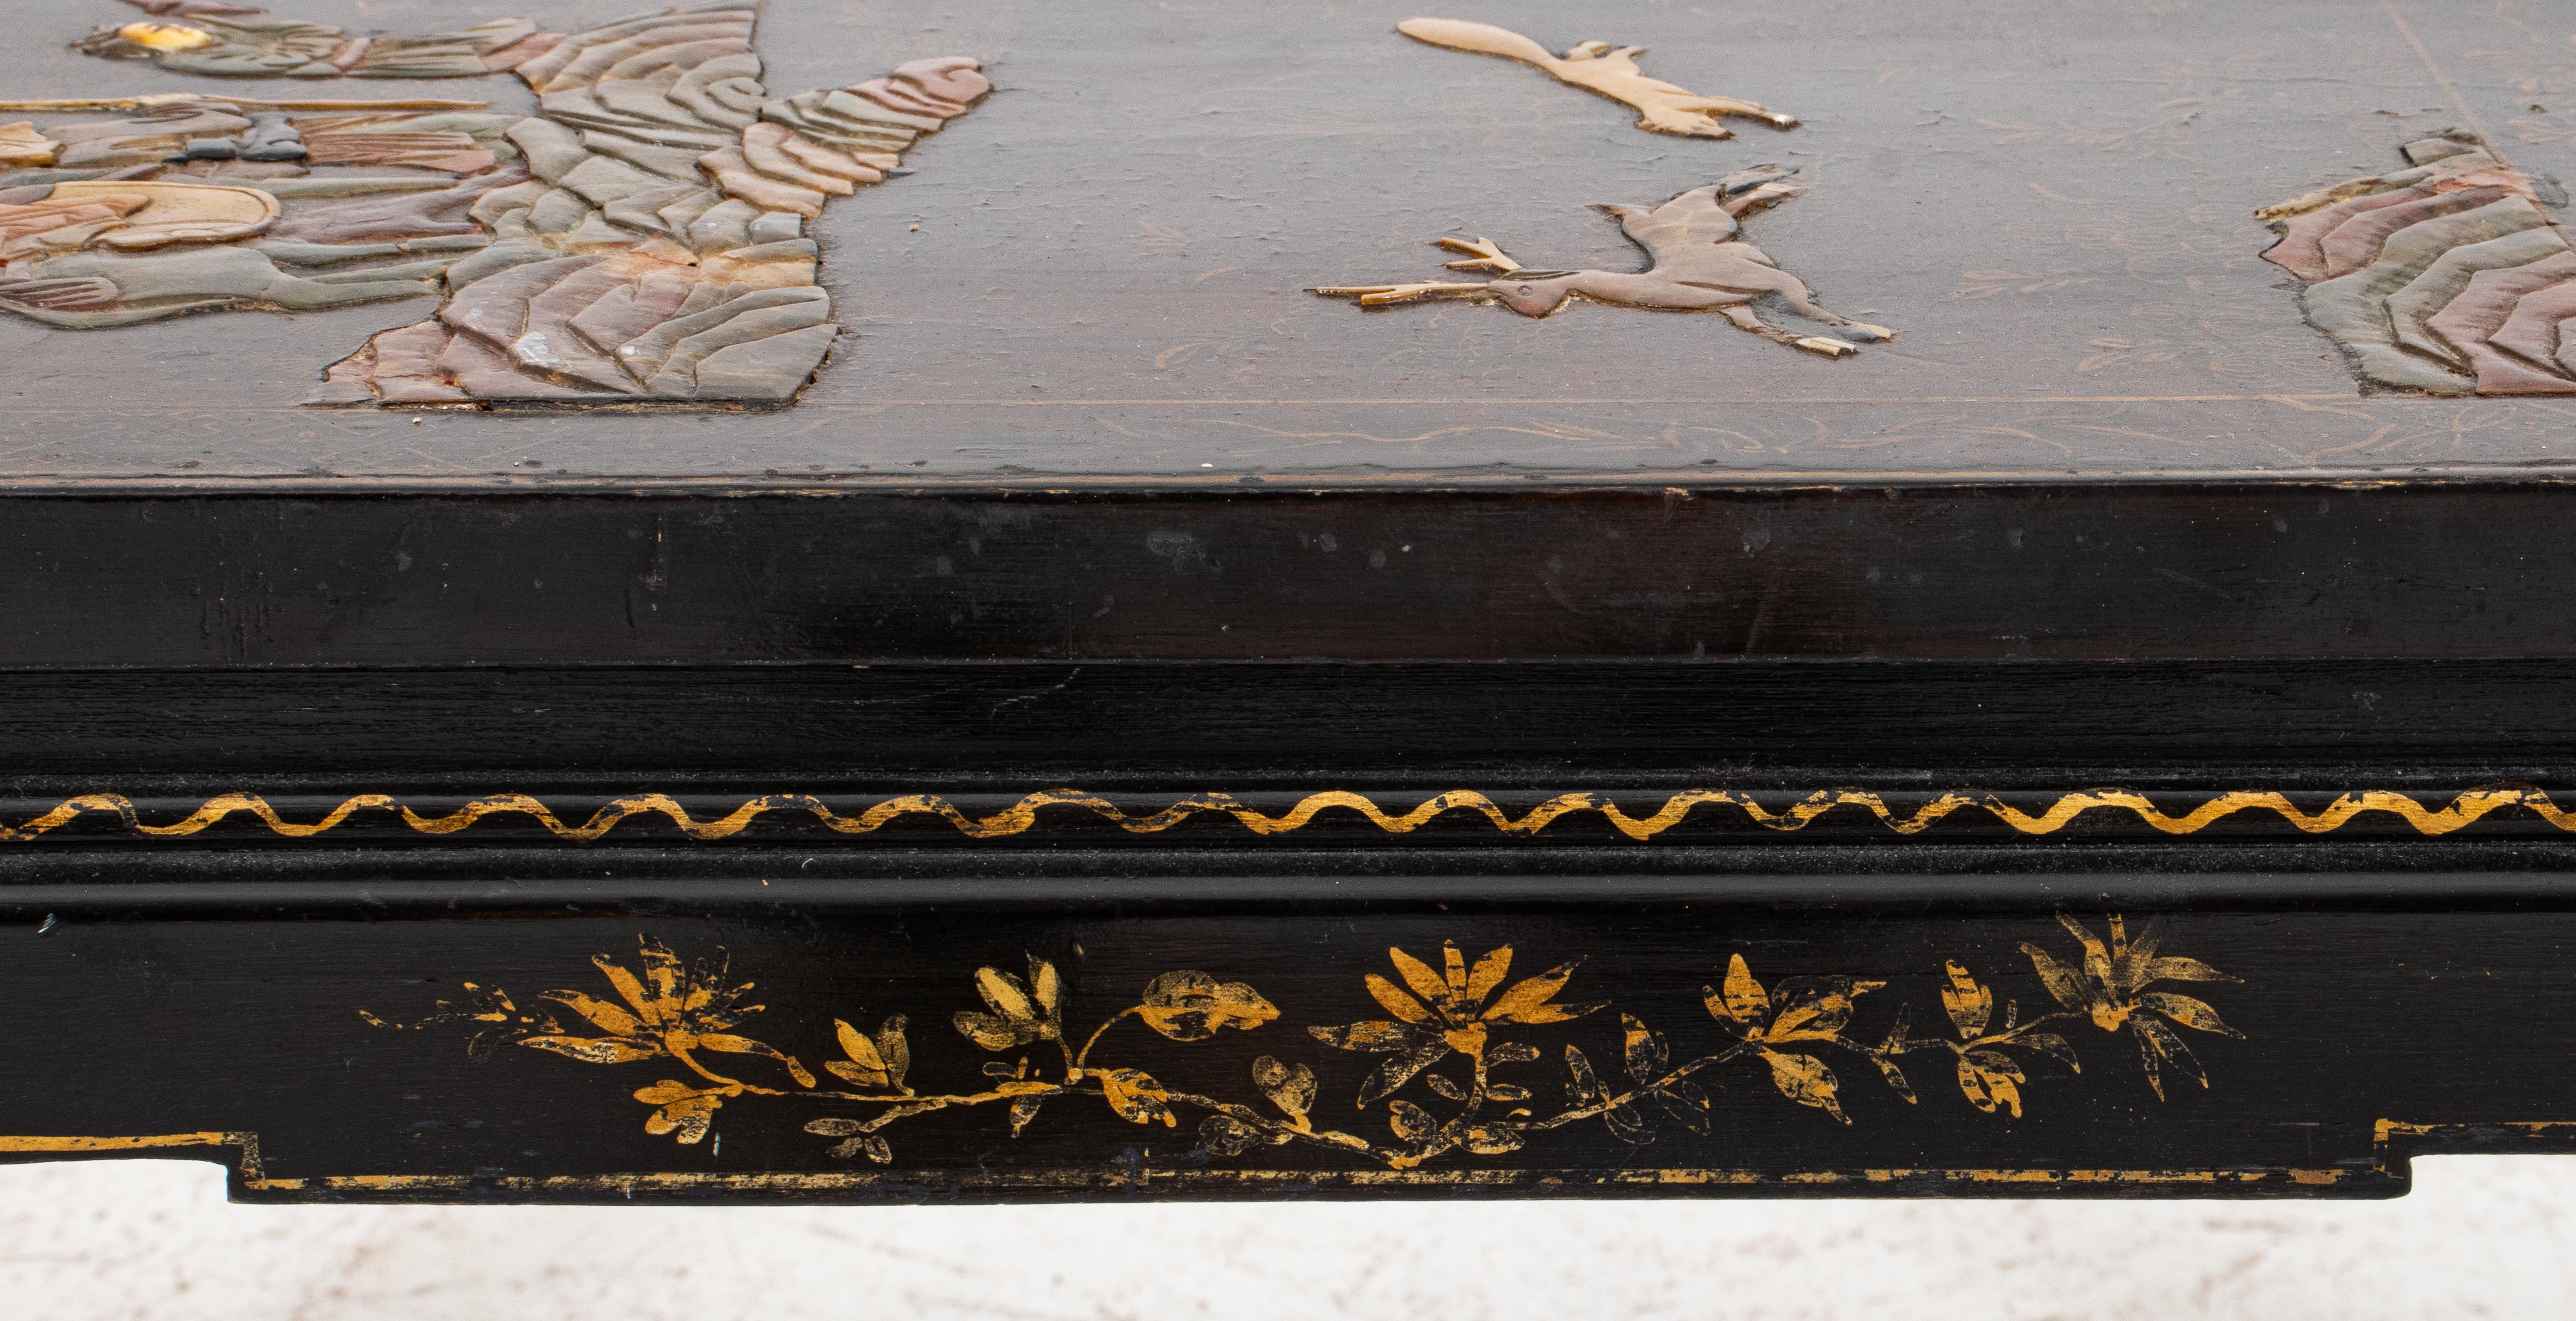 Chinese Export Chinese Hardstone Inlaid Panel Mounted as a Table